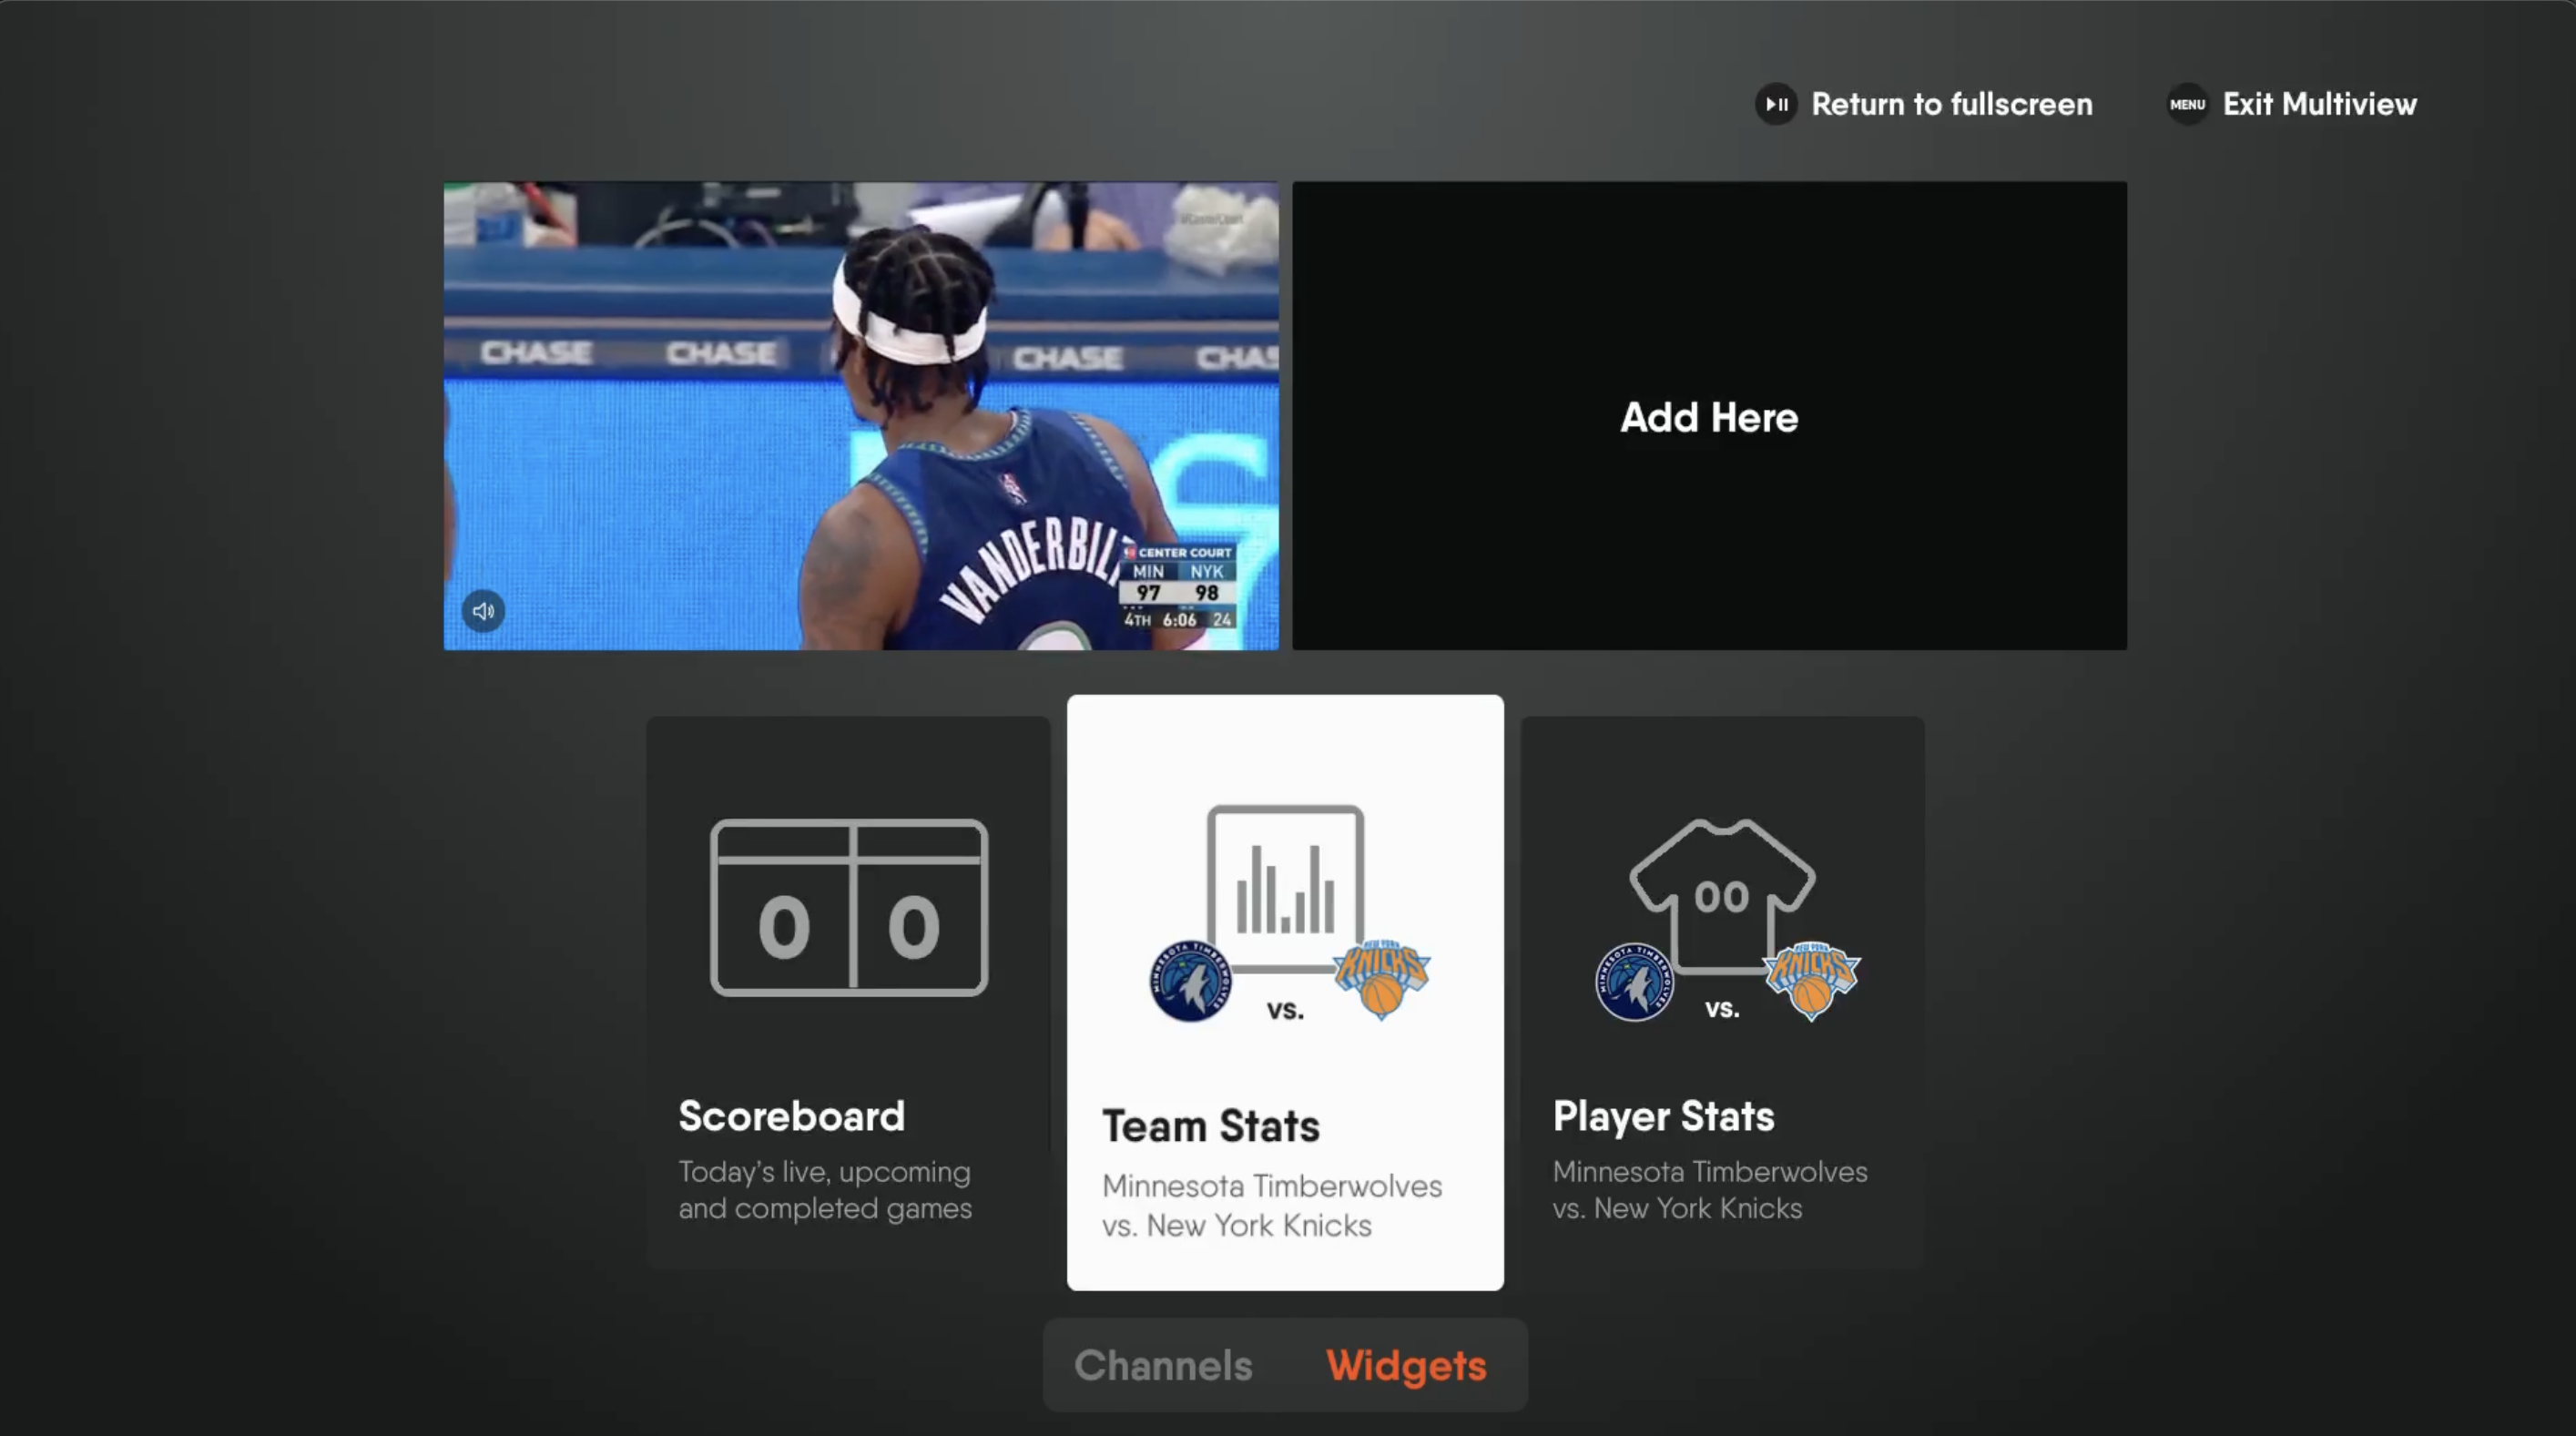 Widget selection for the FuboTV app on Apple TV with TEAM STATS option highlighted